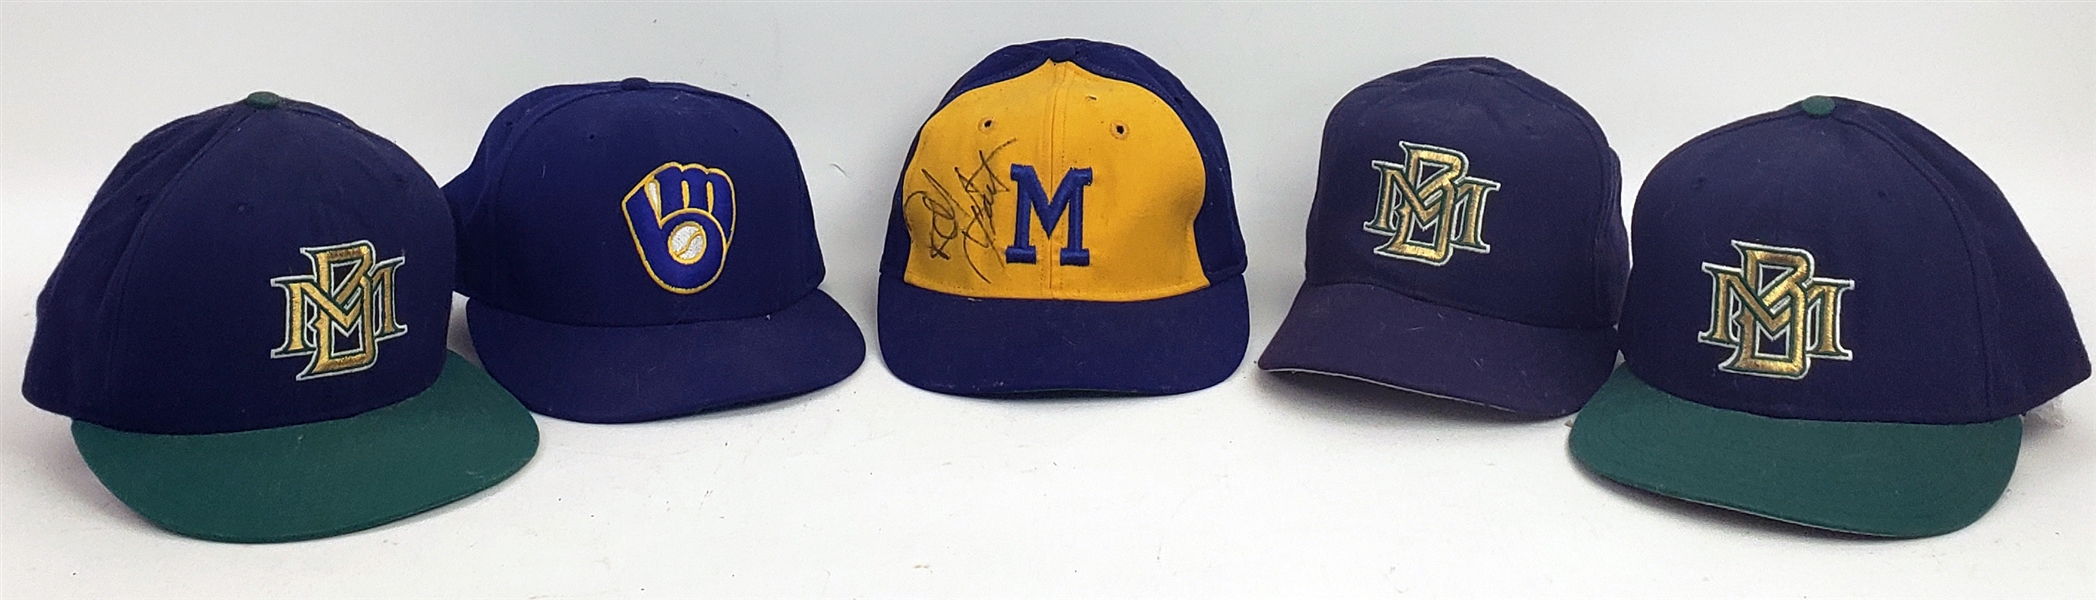 1970s-90s Milwaukee Brewers Game Worn/Signed  Cap Collection - Lot of 5 w/ Robin Yount Signed & More (MEARS LOA/JSA)  